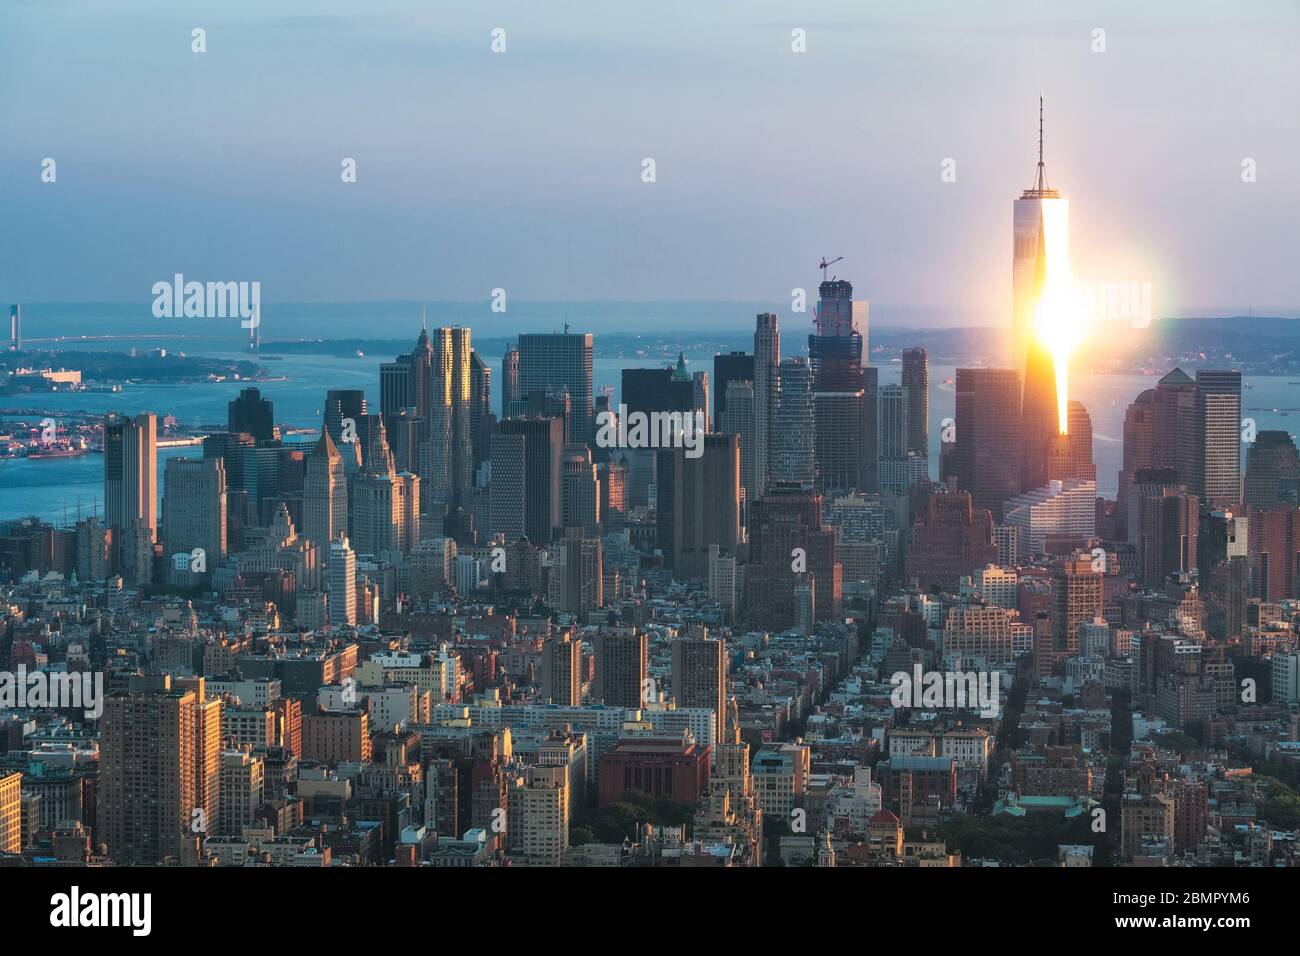 Skyline of New York City showing Lower Manhattan buildings at sunset in New York, United States of America. Stock Photo